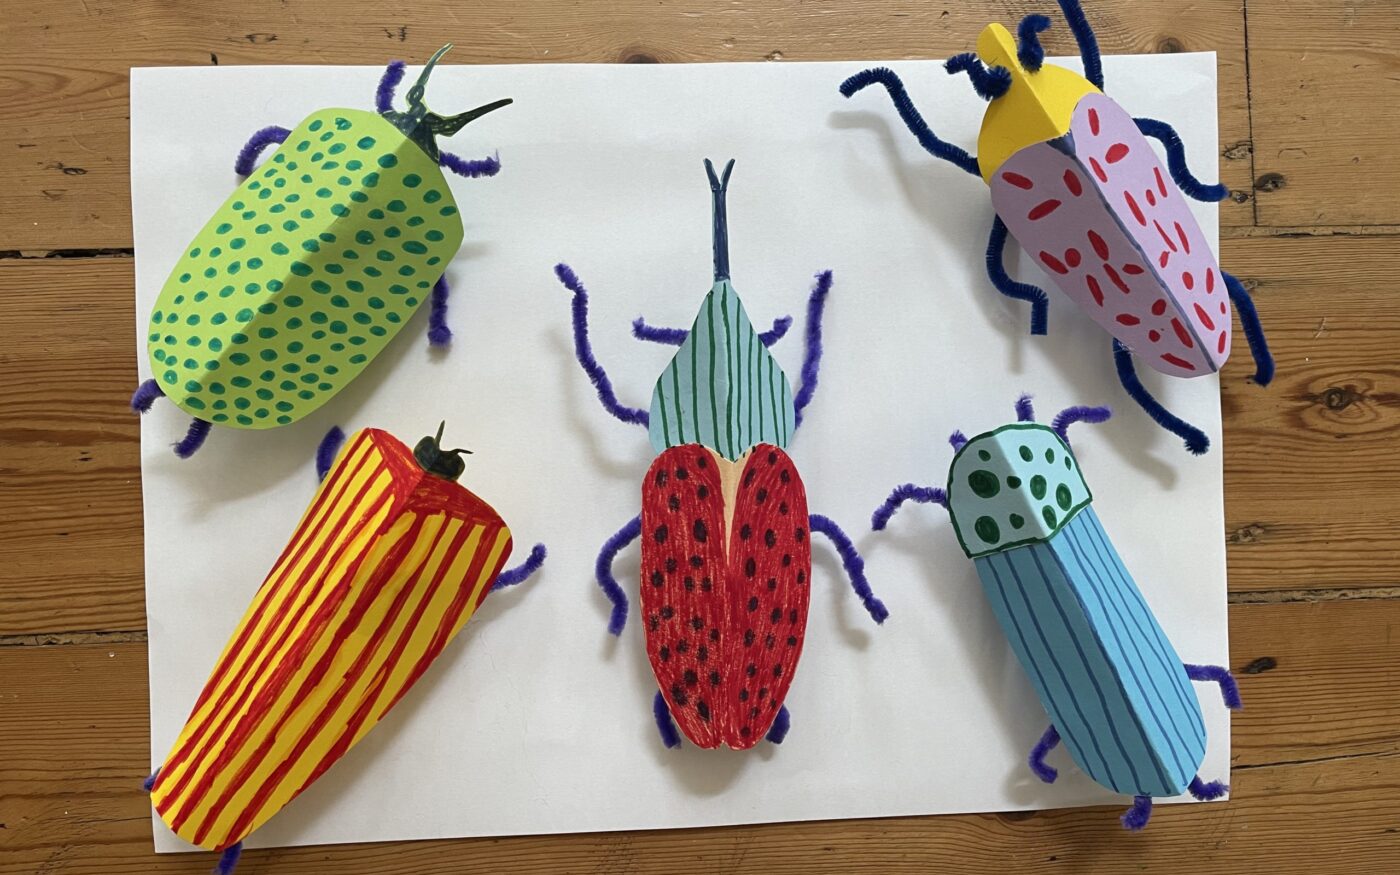 Beetle Art by Celina Wysocka, third place in age 3-7 category, Insect Week 2022 art competition